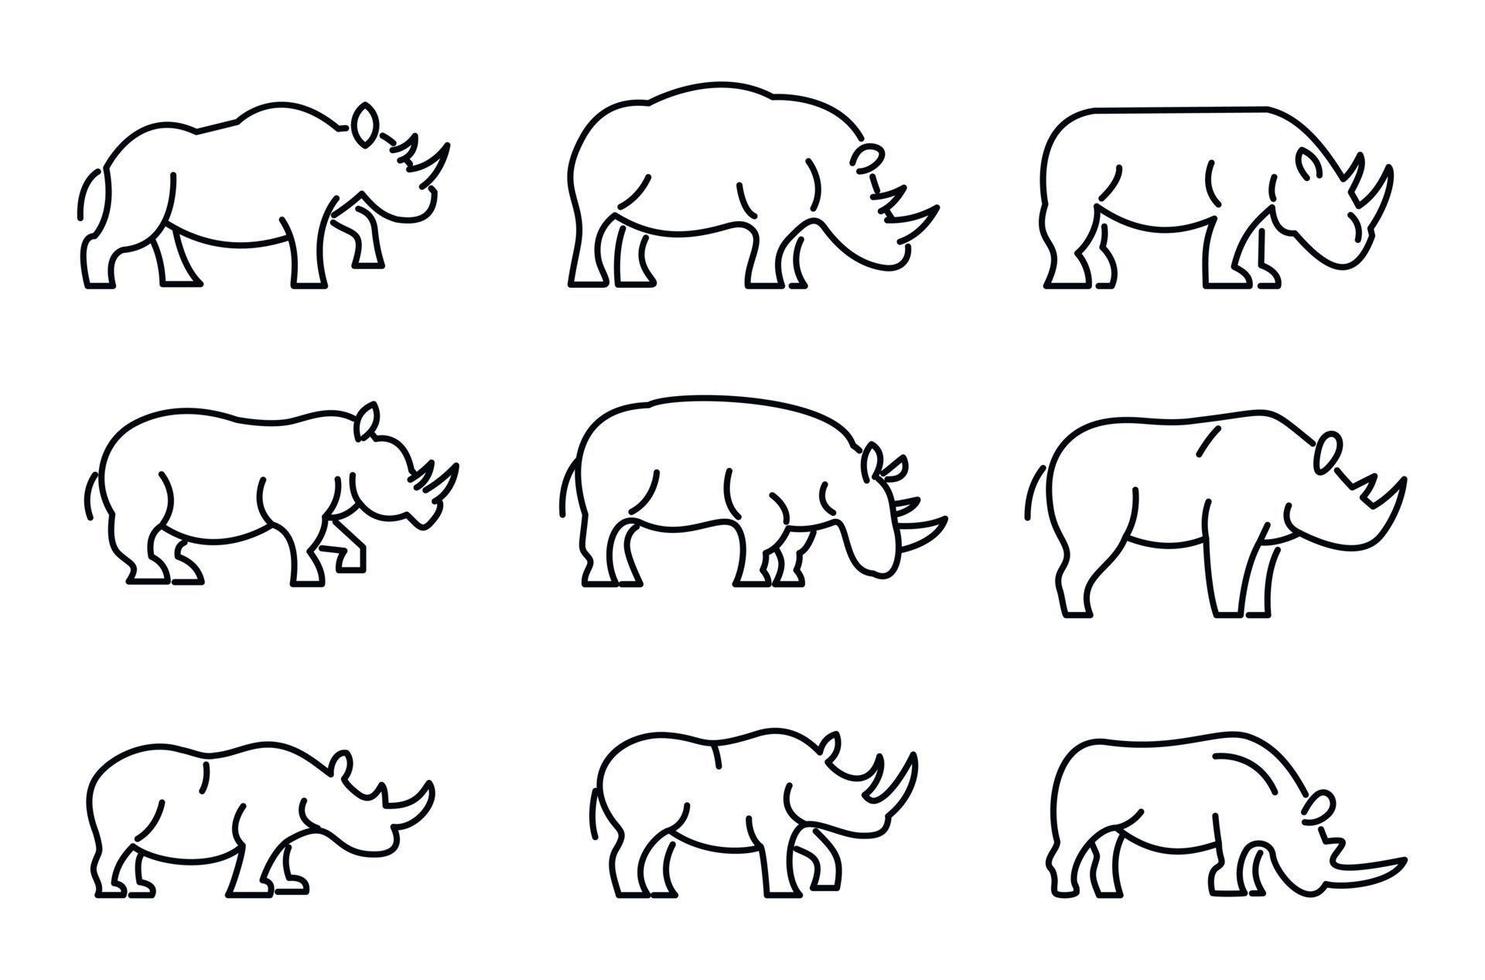 Rhino icons set, outline style vector